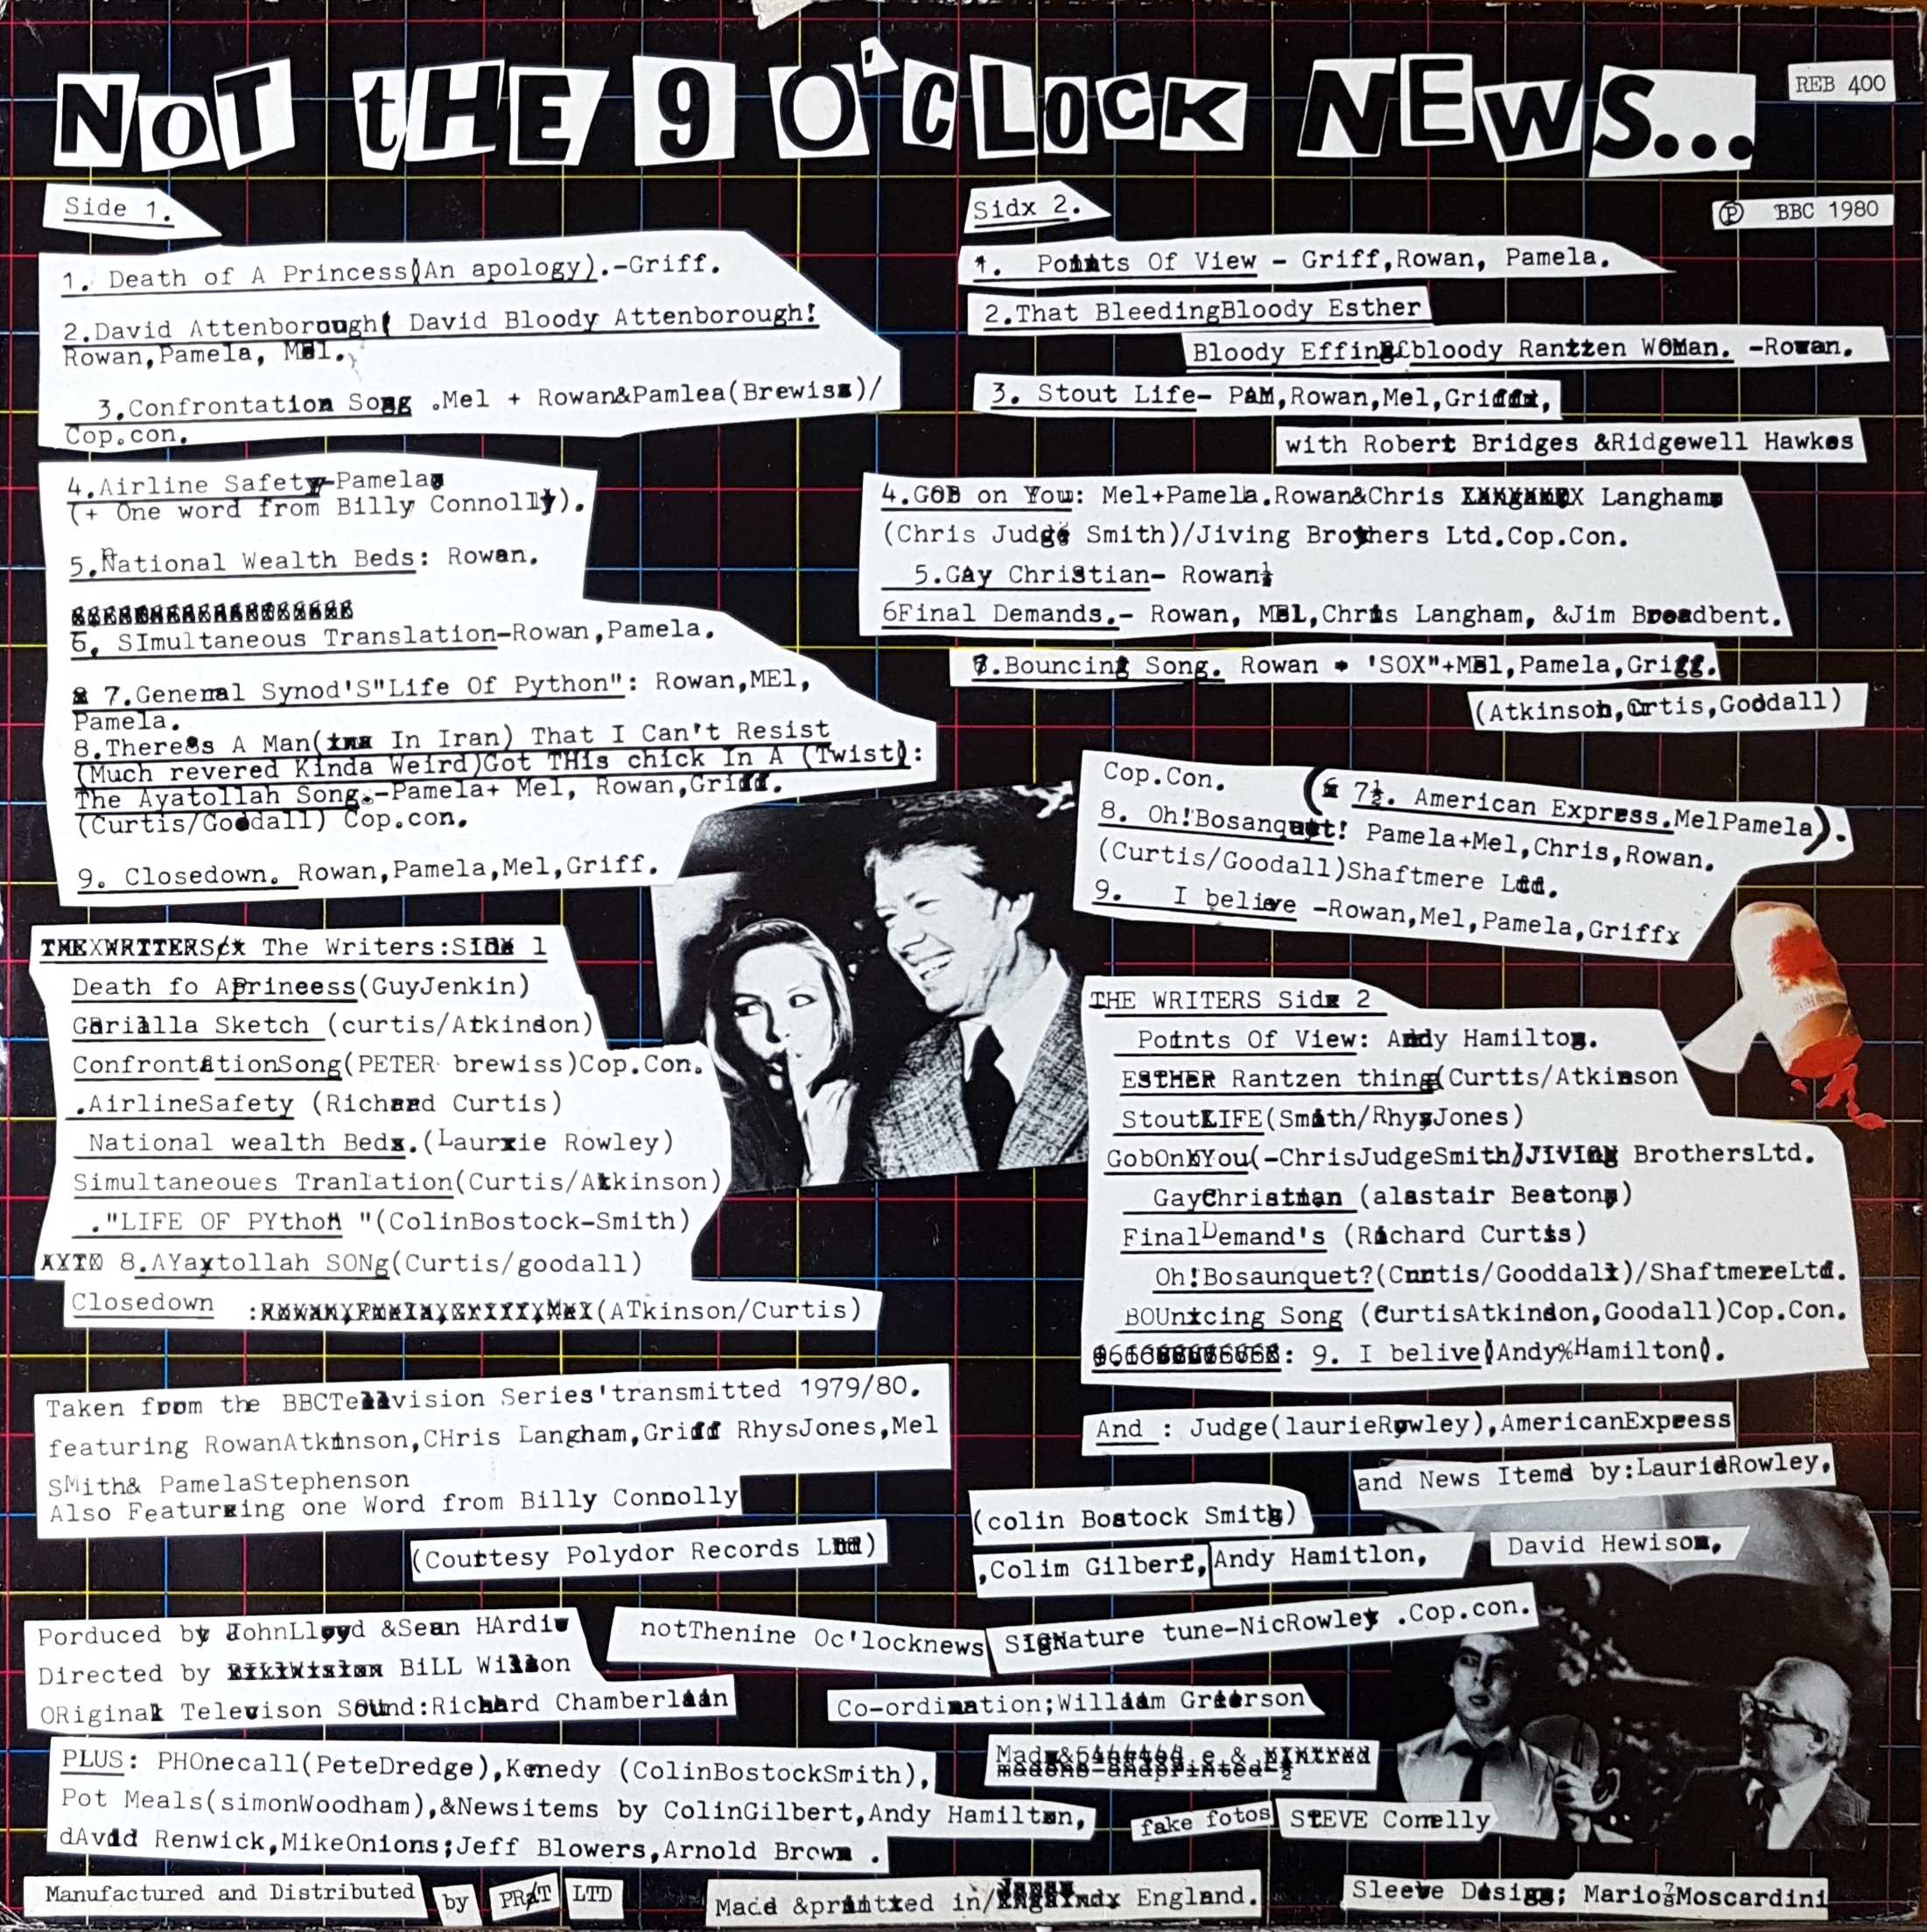 Picture of REB 400 Not the nine o'clock news by artist Various from the BBC records and Tapes library